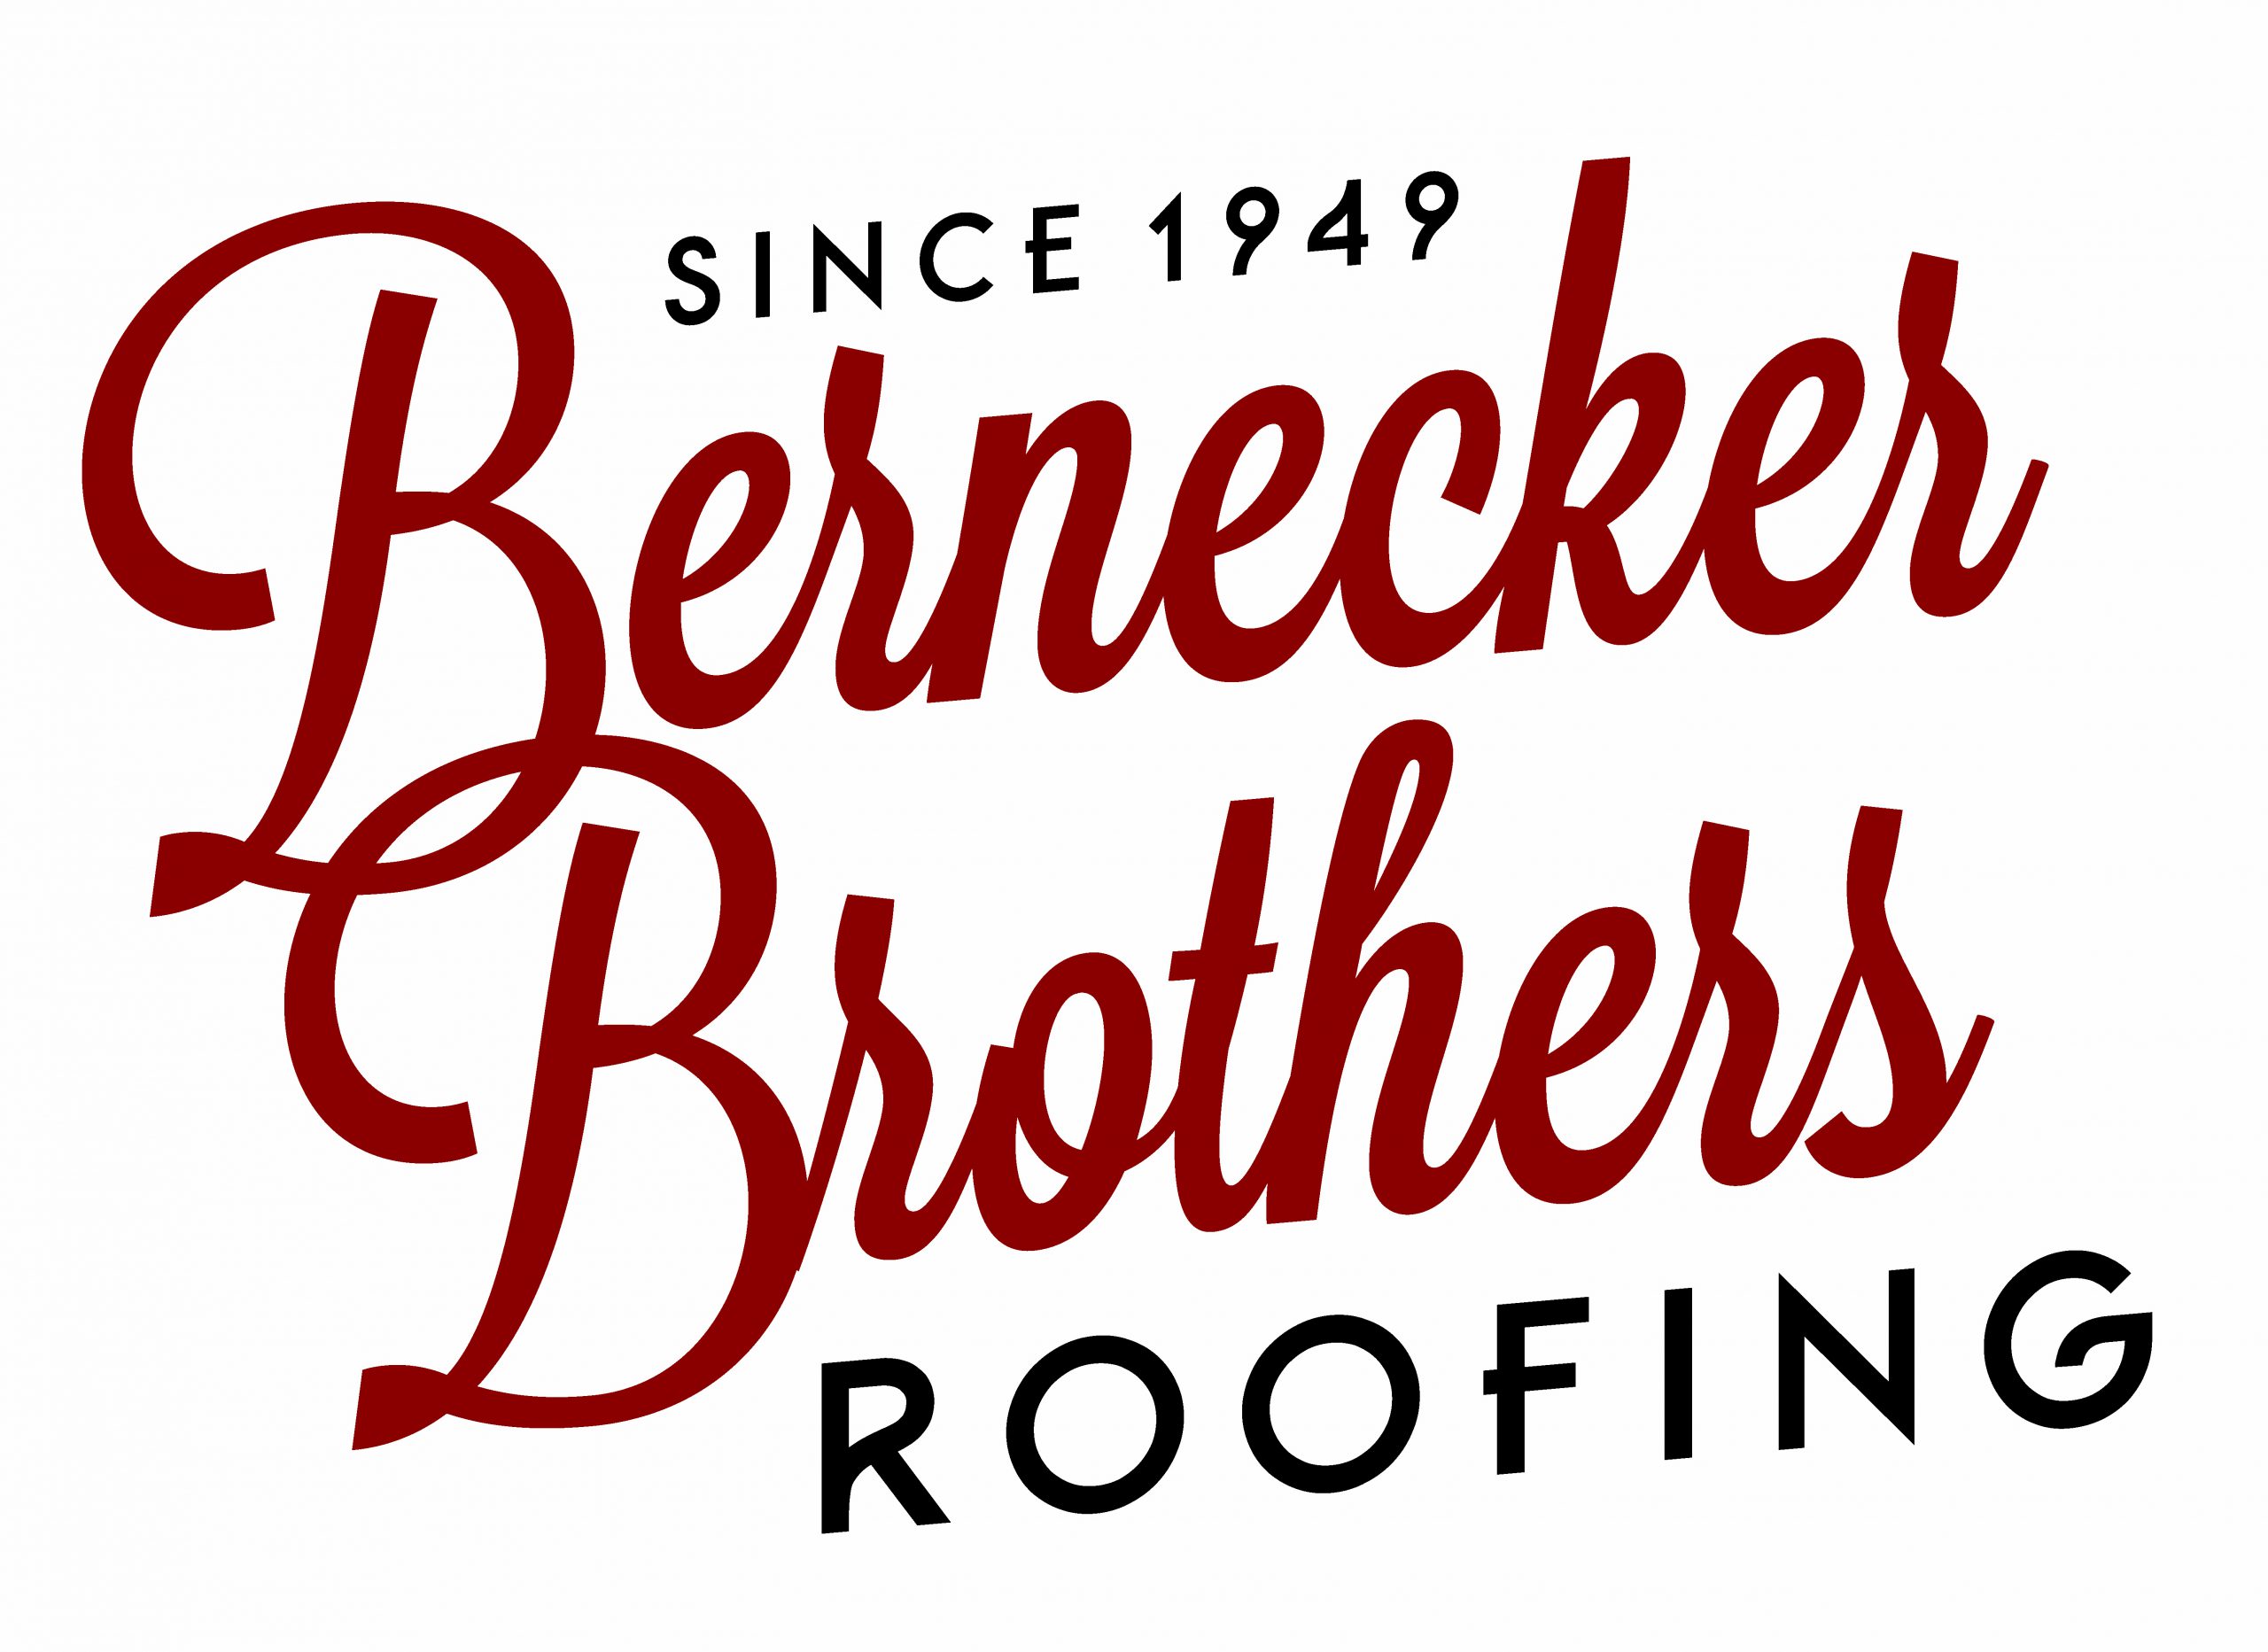 Bernecker Brothers Roofing